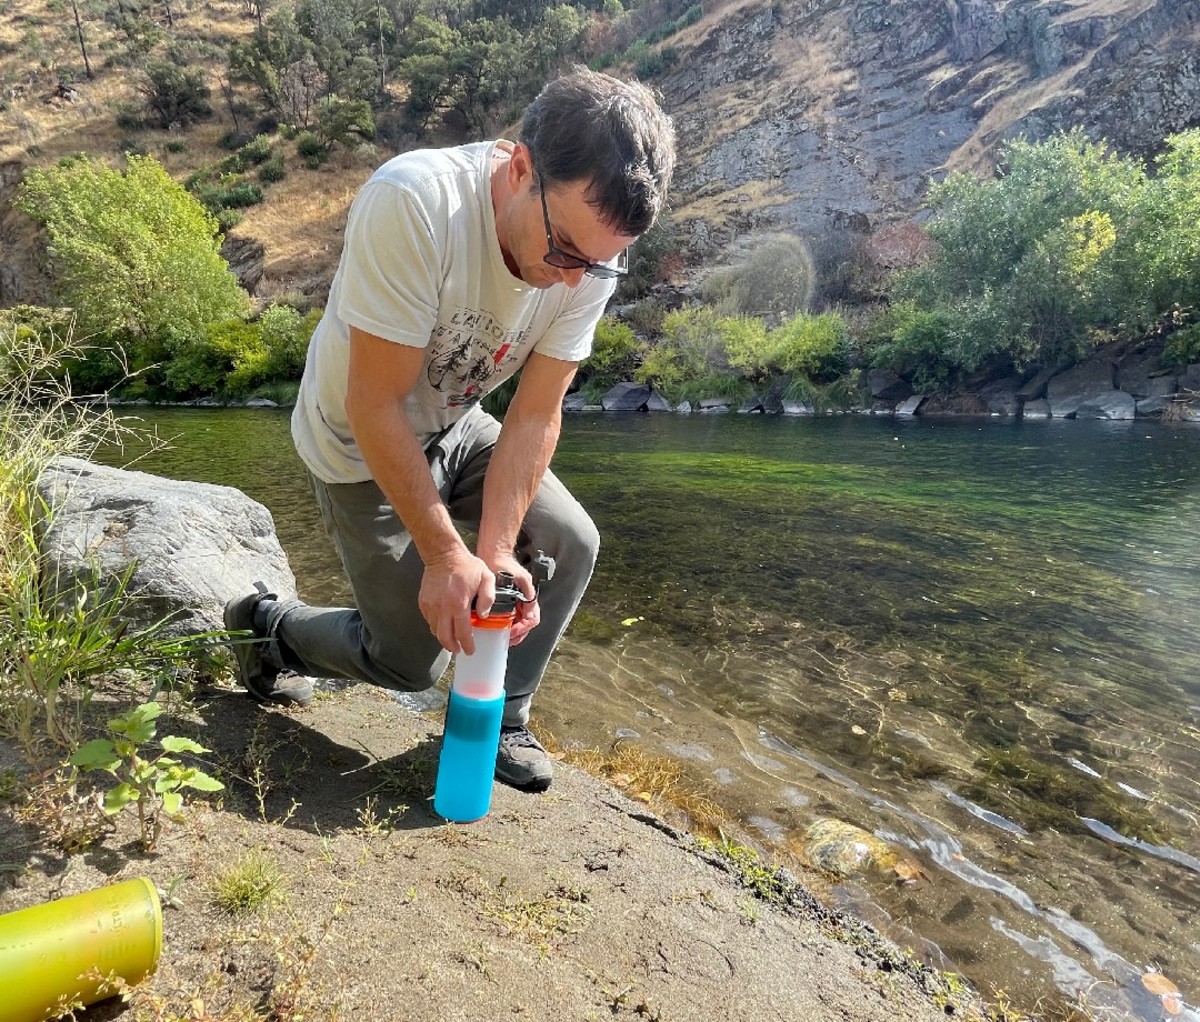 Man inserting filter into purifier bottle by streambed